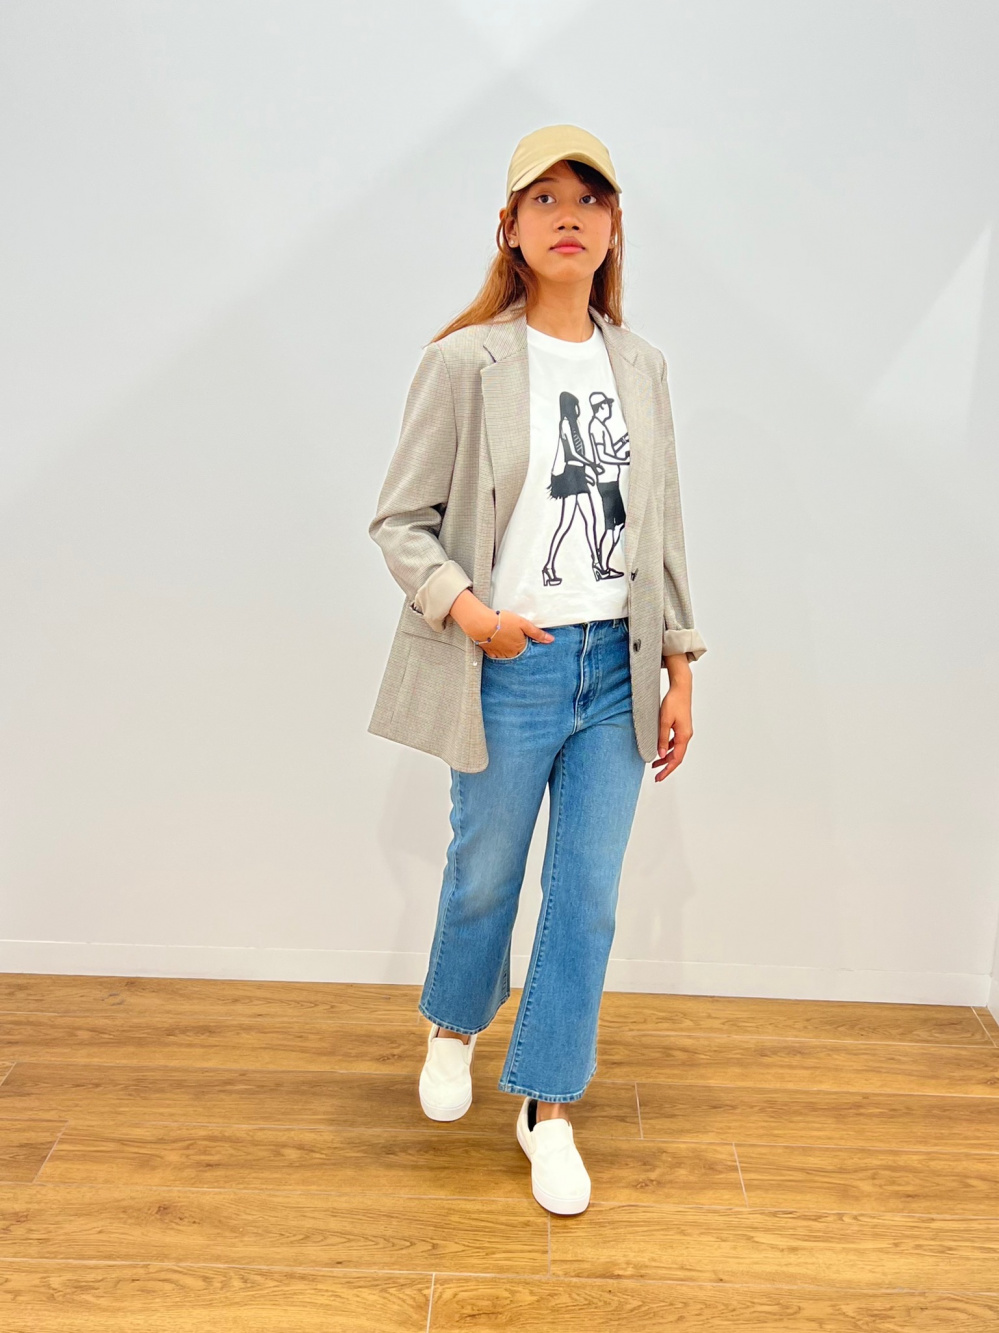 Check styling ideas for「JERSEY SHORT JACKET、EASY FLARED PANTS」